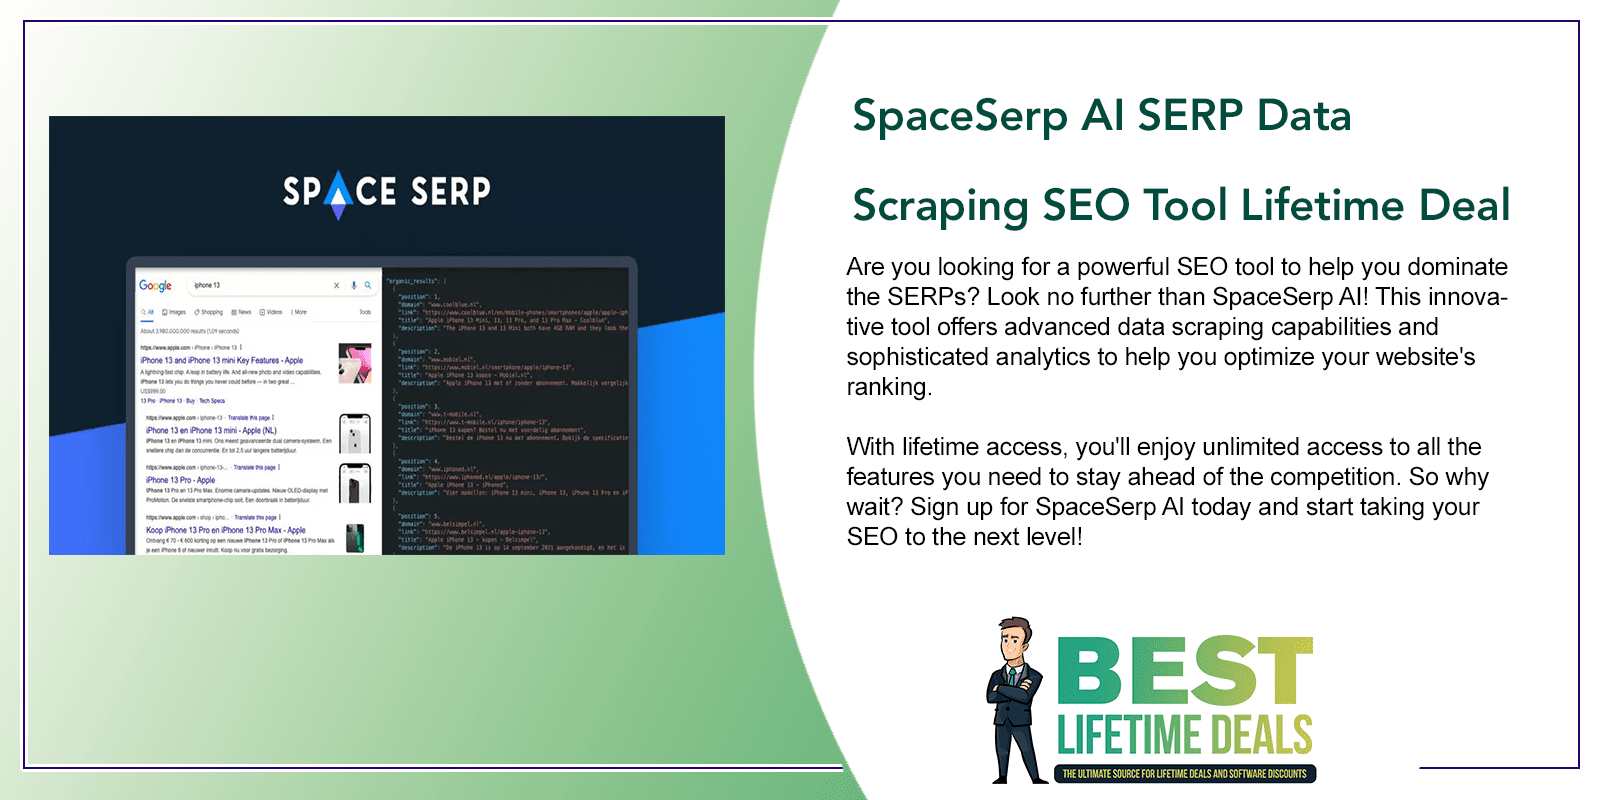 SpaceSerp AI SERP Data Scraping SEO Tool Lifetime Deal Featured Image